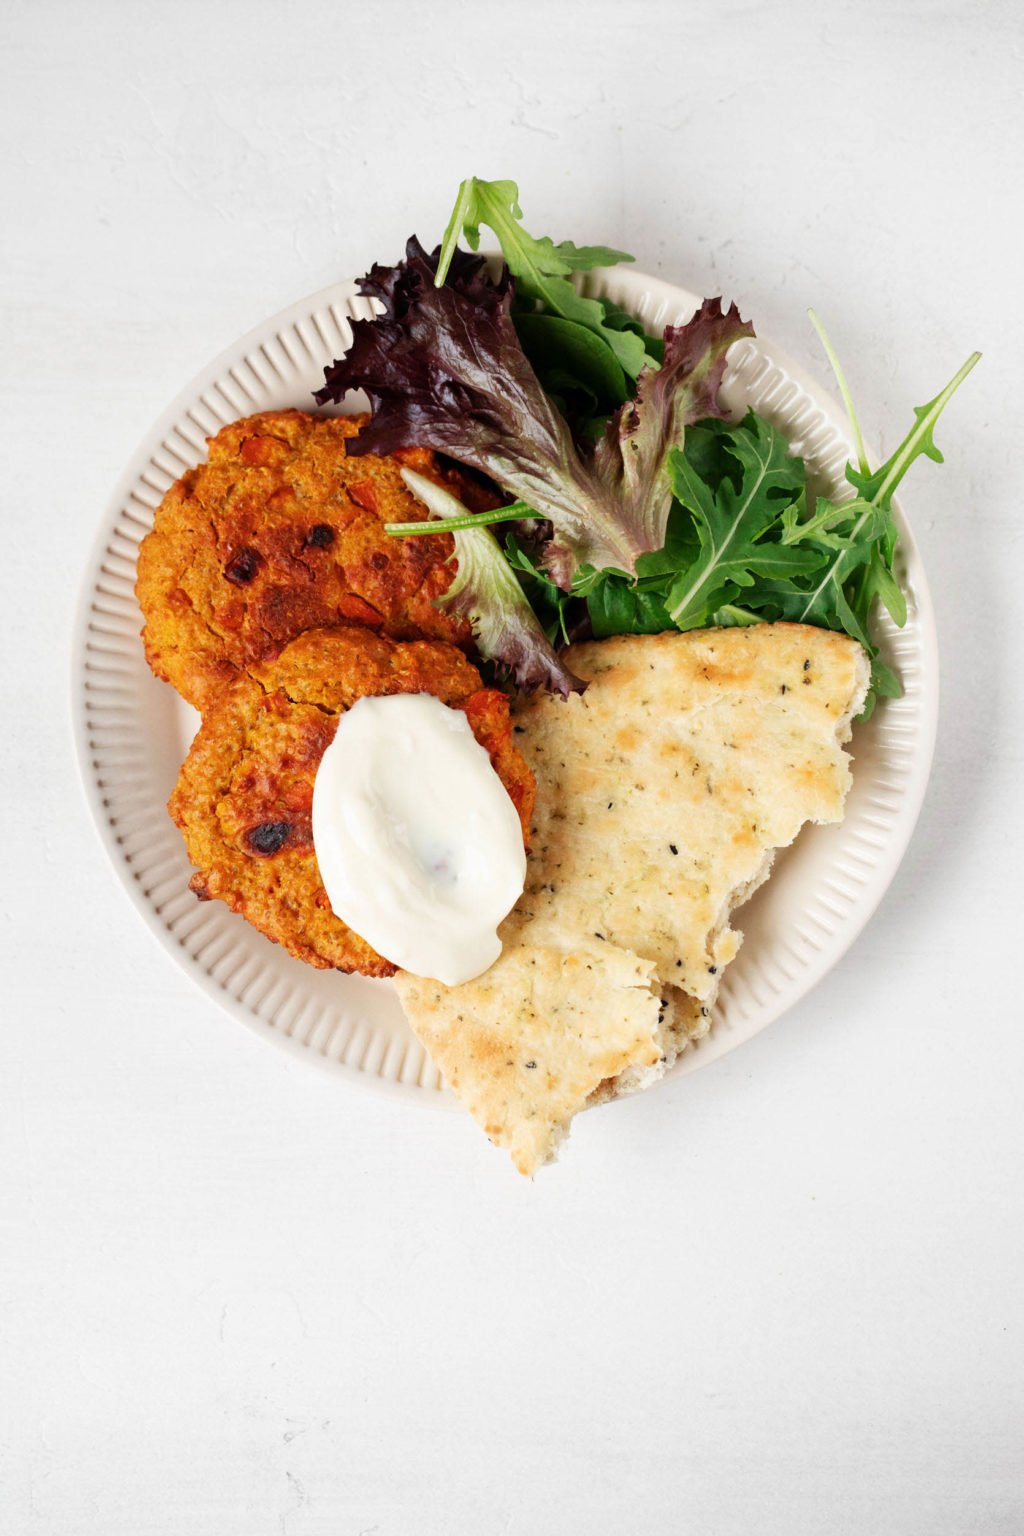 A white, rimmed plate has been topped with a piece of naan bread, mixed greens, plant-based patties, and a dollop of a dairy-free cream sauce. It rests on a white surface.